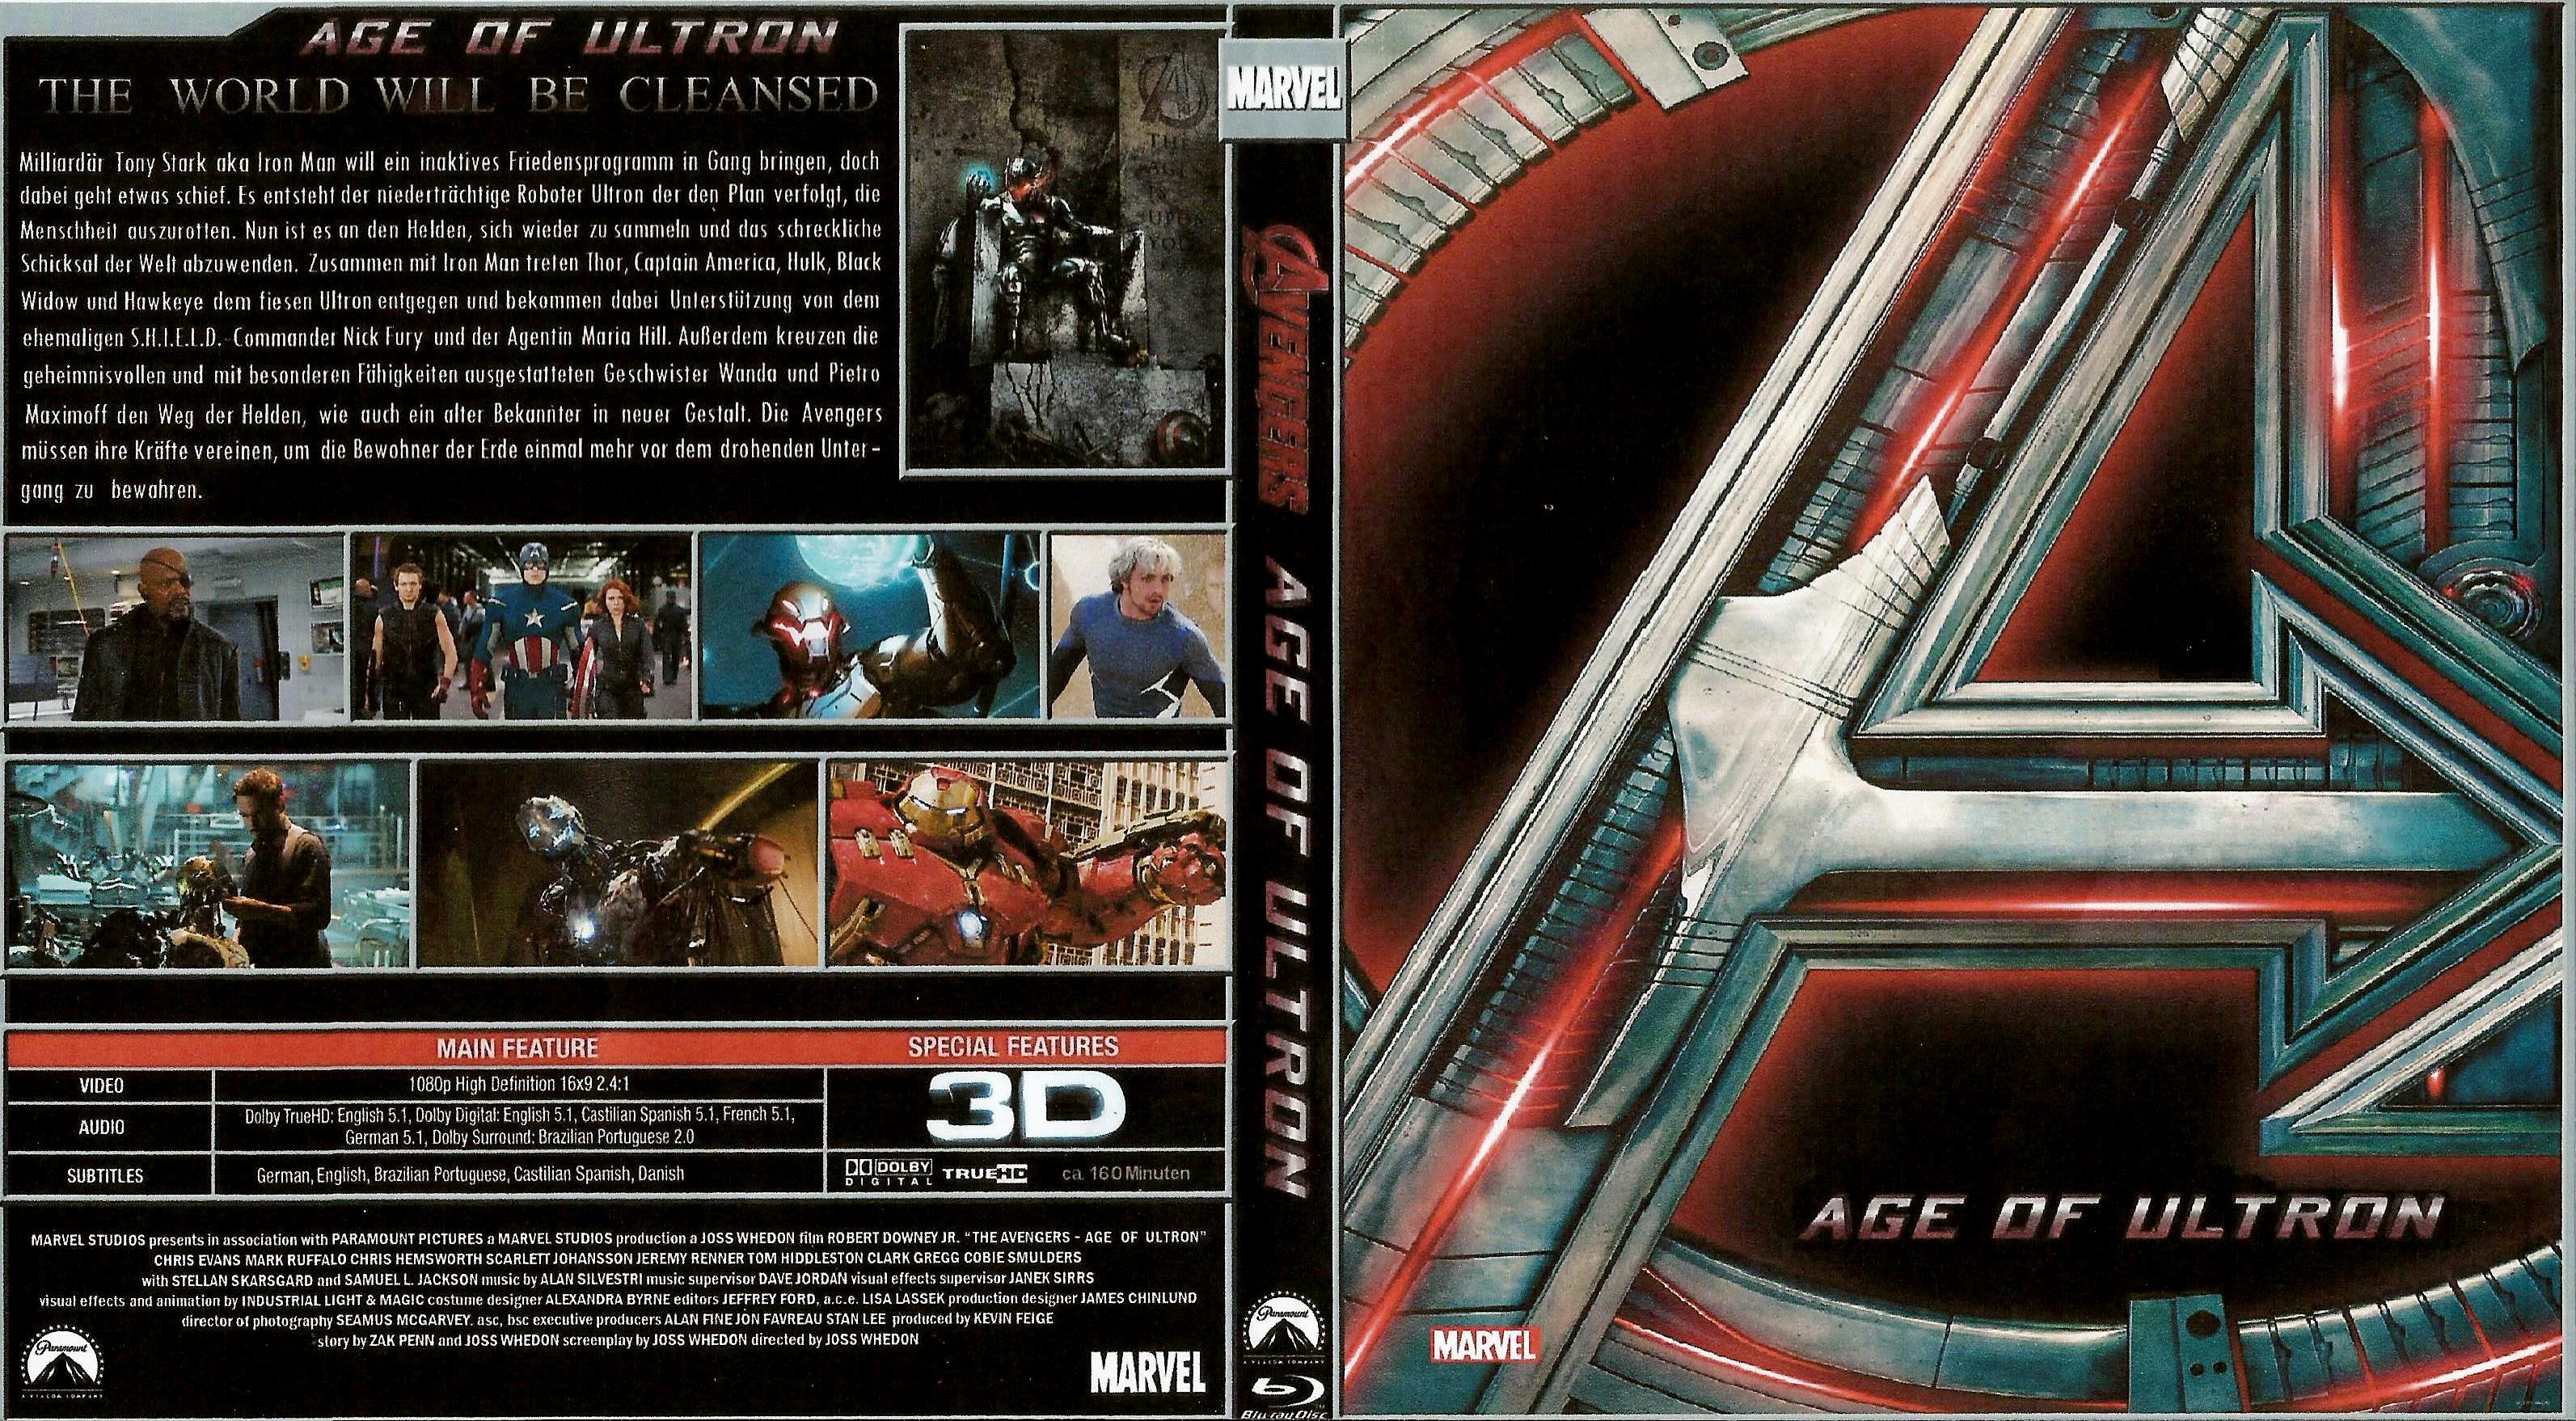 avengers age of ultron full movie in hindi free download mp4